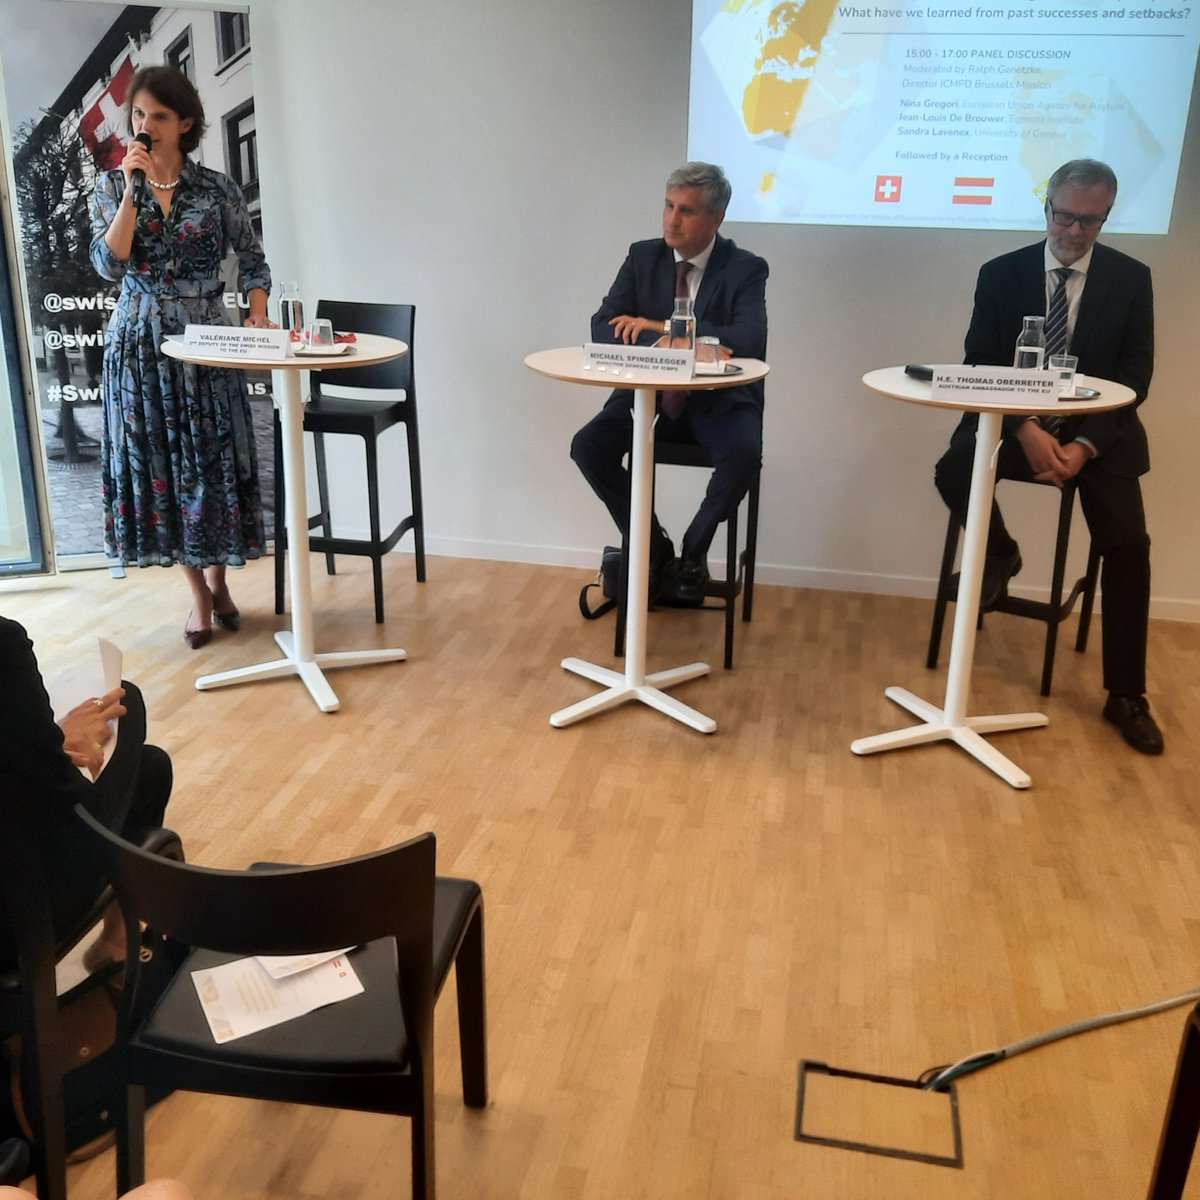 On the occasion of @ICMPD 30th anniversary, the 
🇨🇭Deputy Head of Mission to the 🇪🇺 Valériane Michel opened the event on #EUMigration and #asylum  policy at the @SwissEUmission together with with the 🇦🇹 Ambassador @t_oberreiter & the ICMPD Director General Michael Spindelegger.